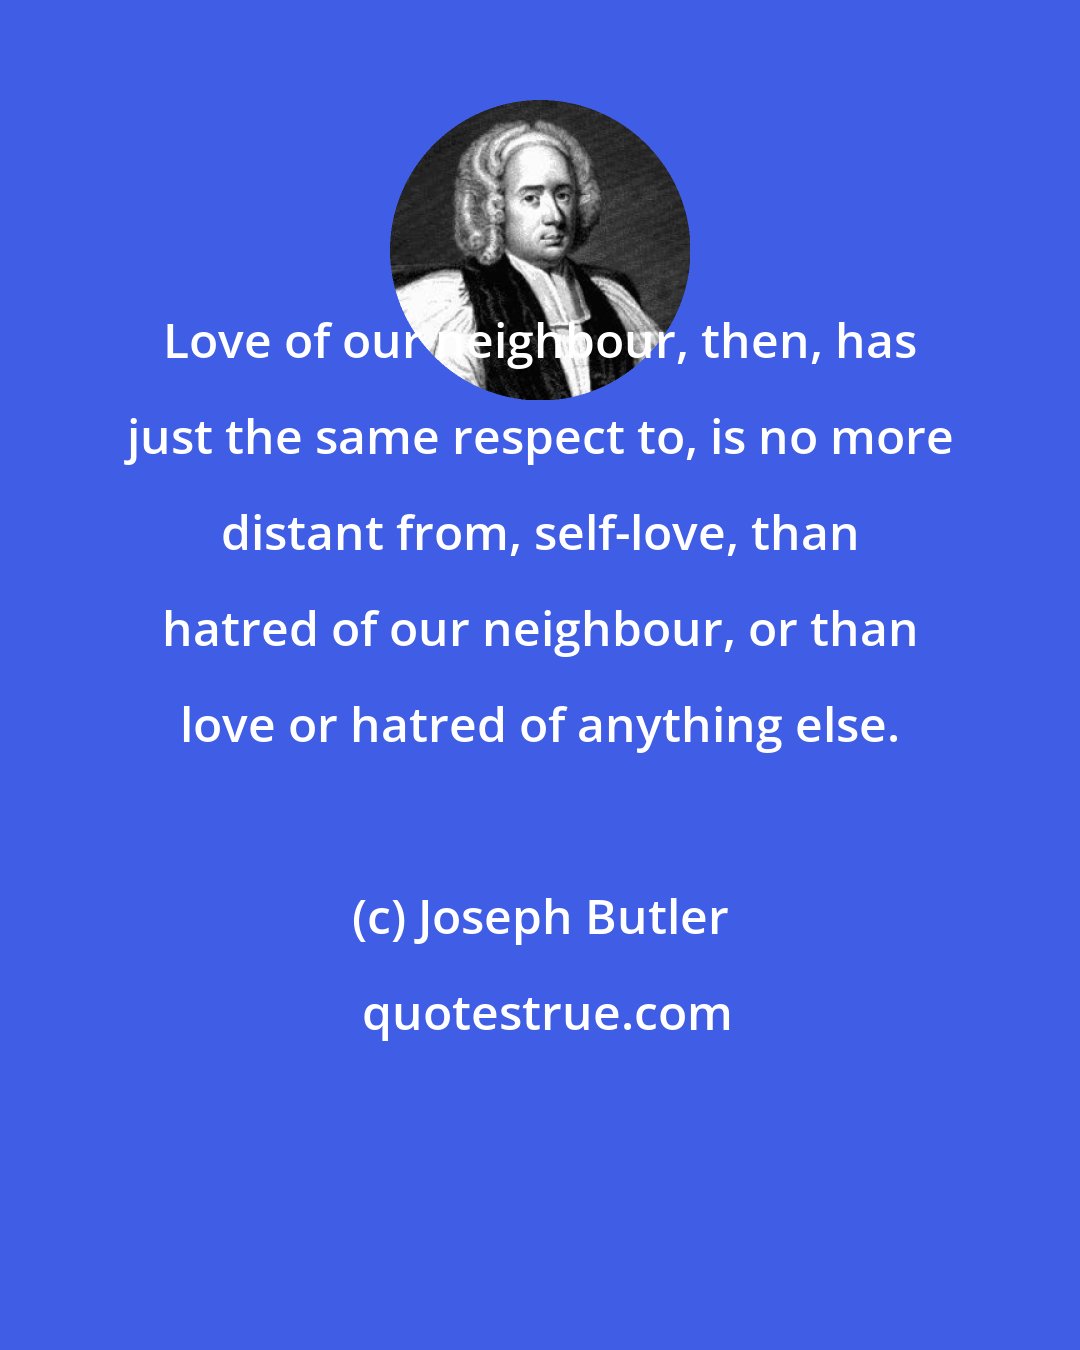 Joseph Butler: Love of our neighbour, then, has just the same respect to, is no more distant from, self-love, than hatred of our neighbour, or than love or hatred of anything else.